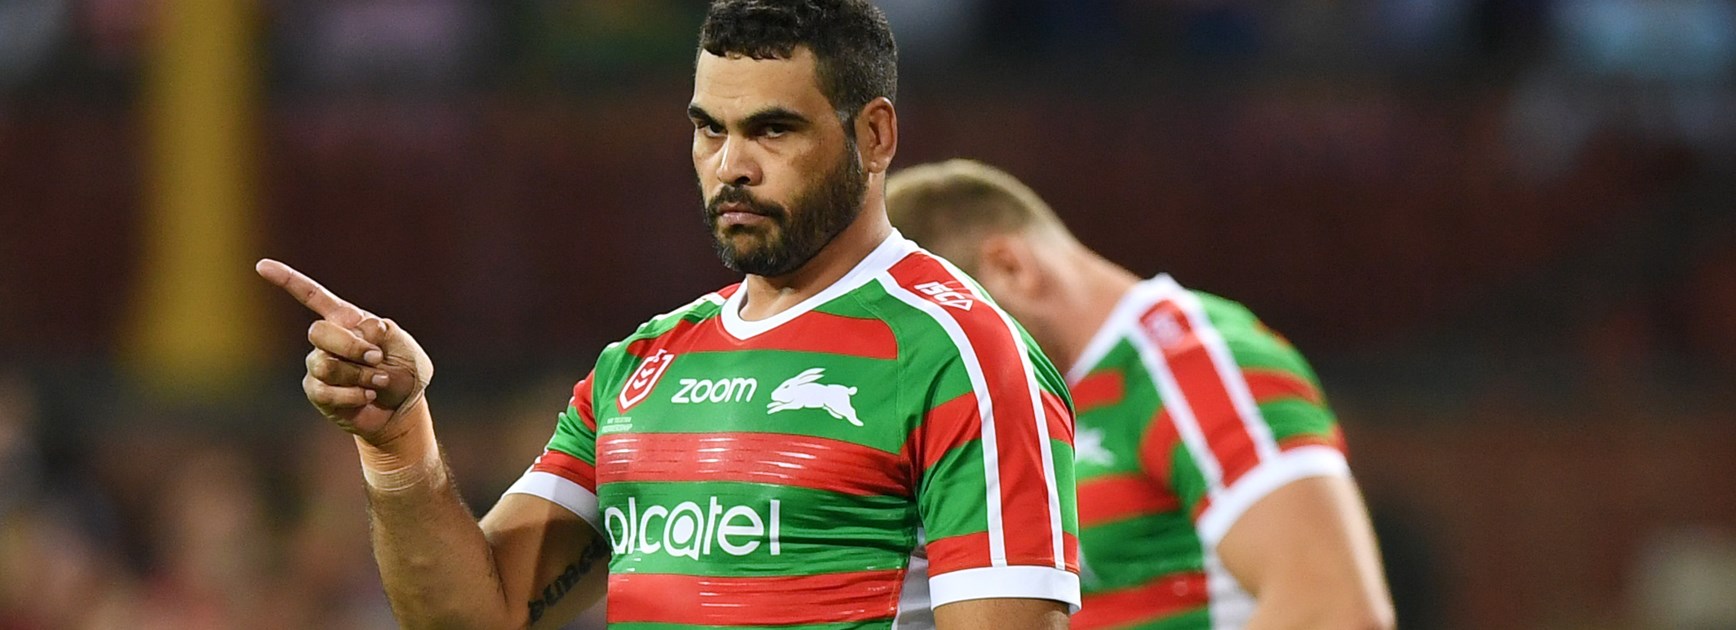 Inglis granted a week's leave by South Sydney